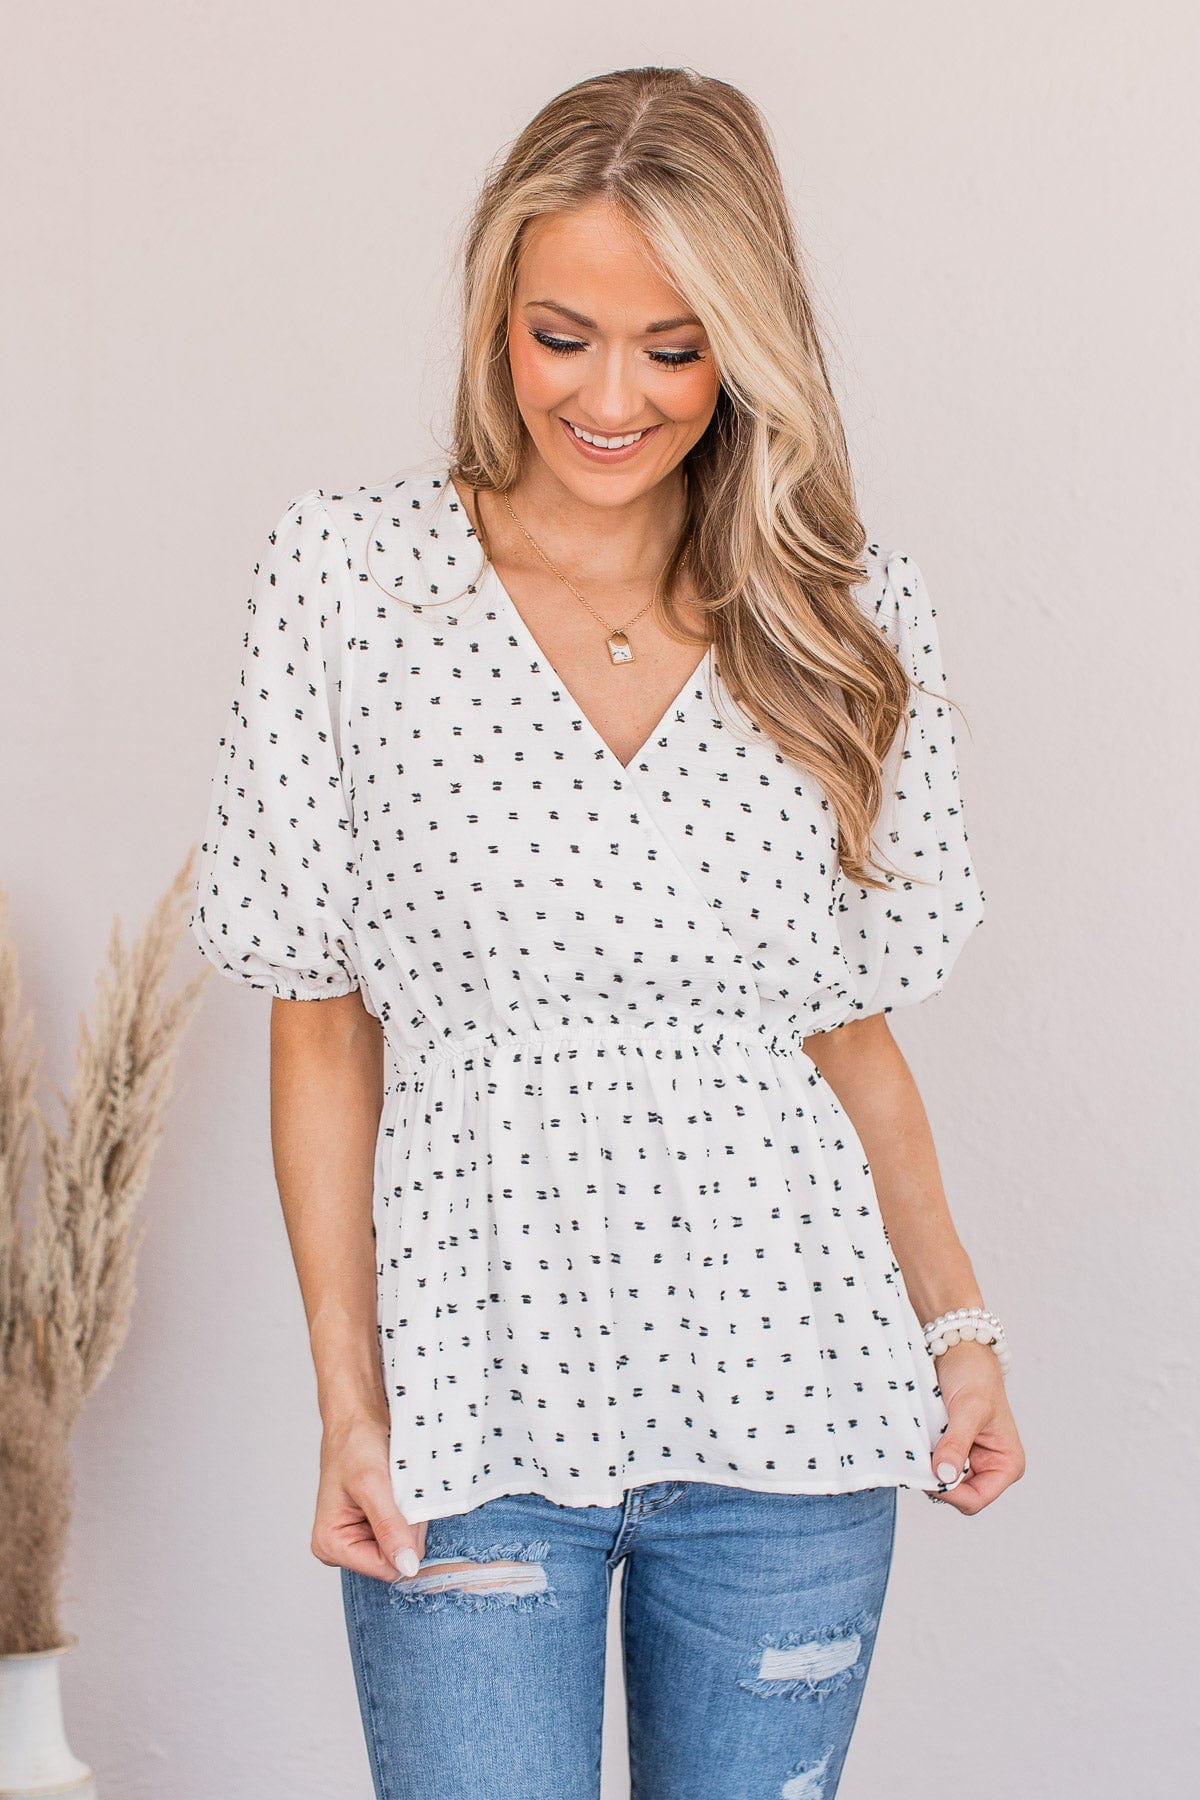 Think Happy Thoughts Swiss Dot Top- White